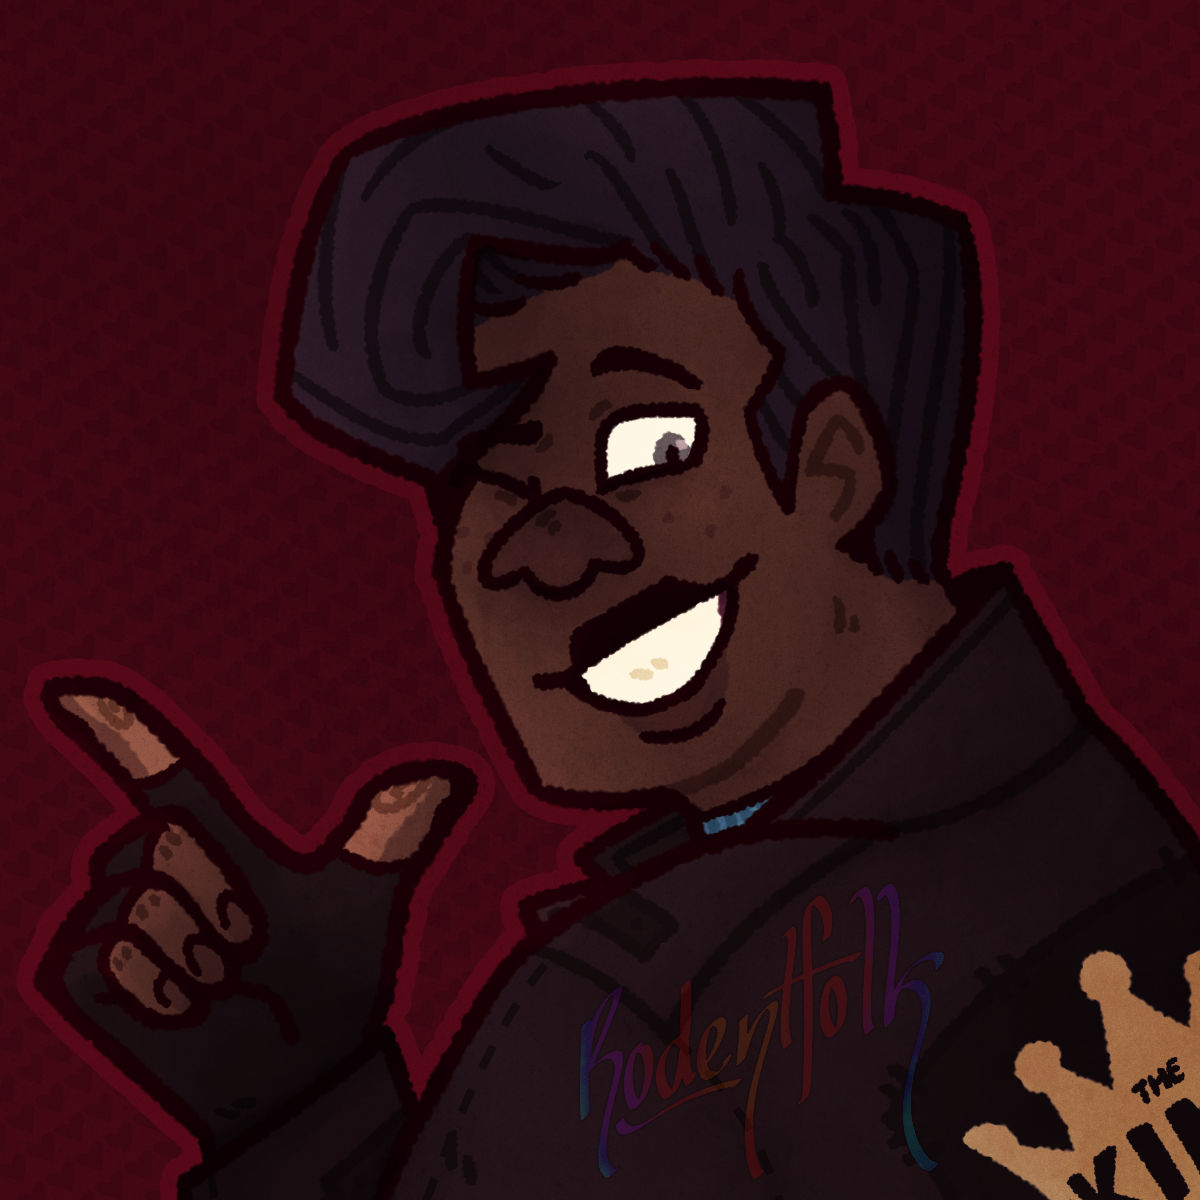 It is an illustration of Nik's courier OC 'Nathan' for Fallout New Vegas. He is a black man with grey eyes and black hair styled in 'Tunnel Snake' fashion. He wears a dark brown jacket with a patch on the back with the Kings' symbol on it and black fingerless gloves. He winks at the camera as he smiles while making a finger gun gesture.